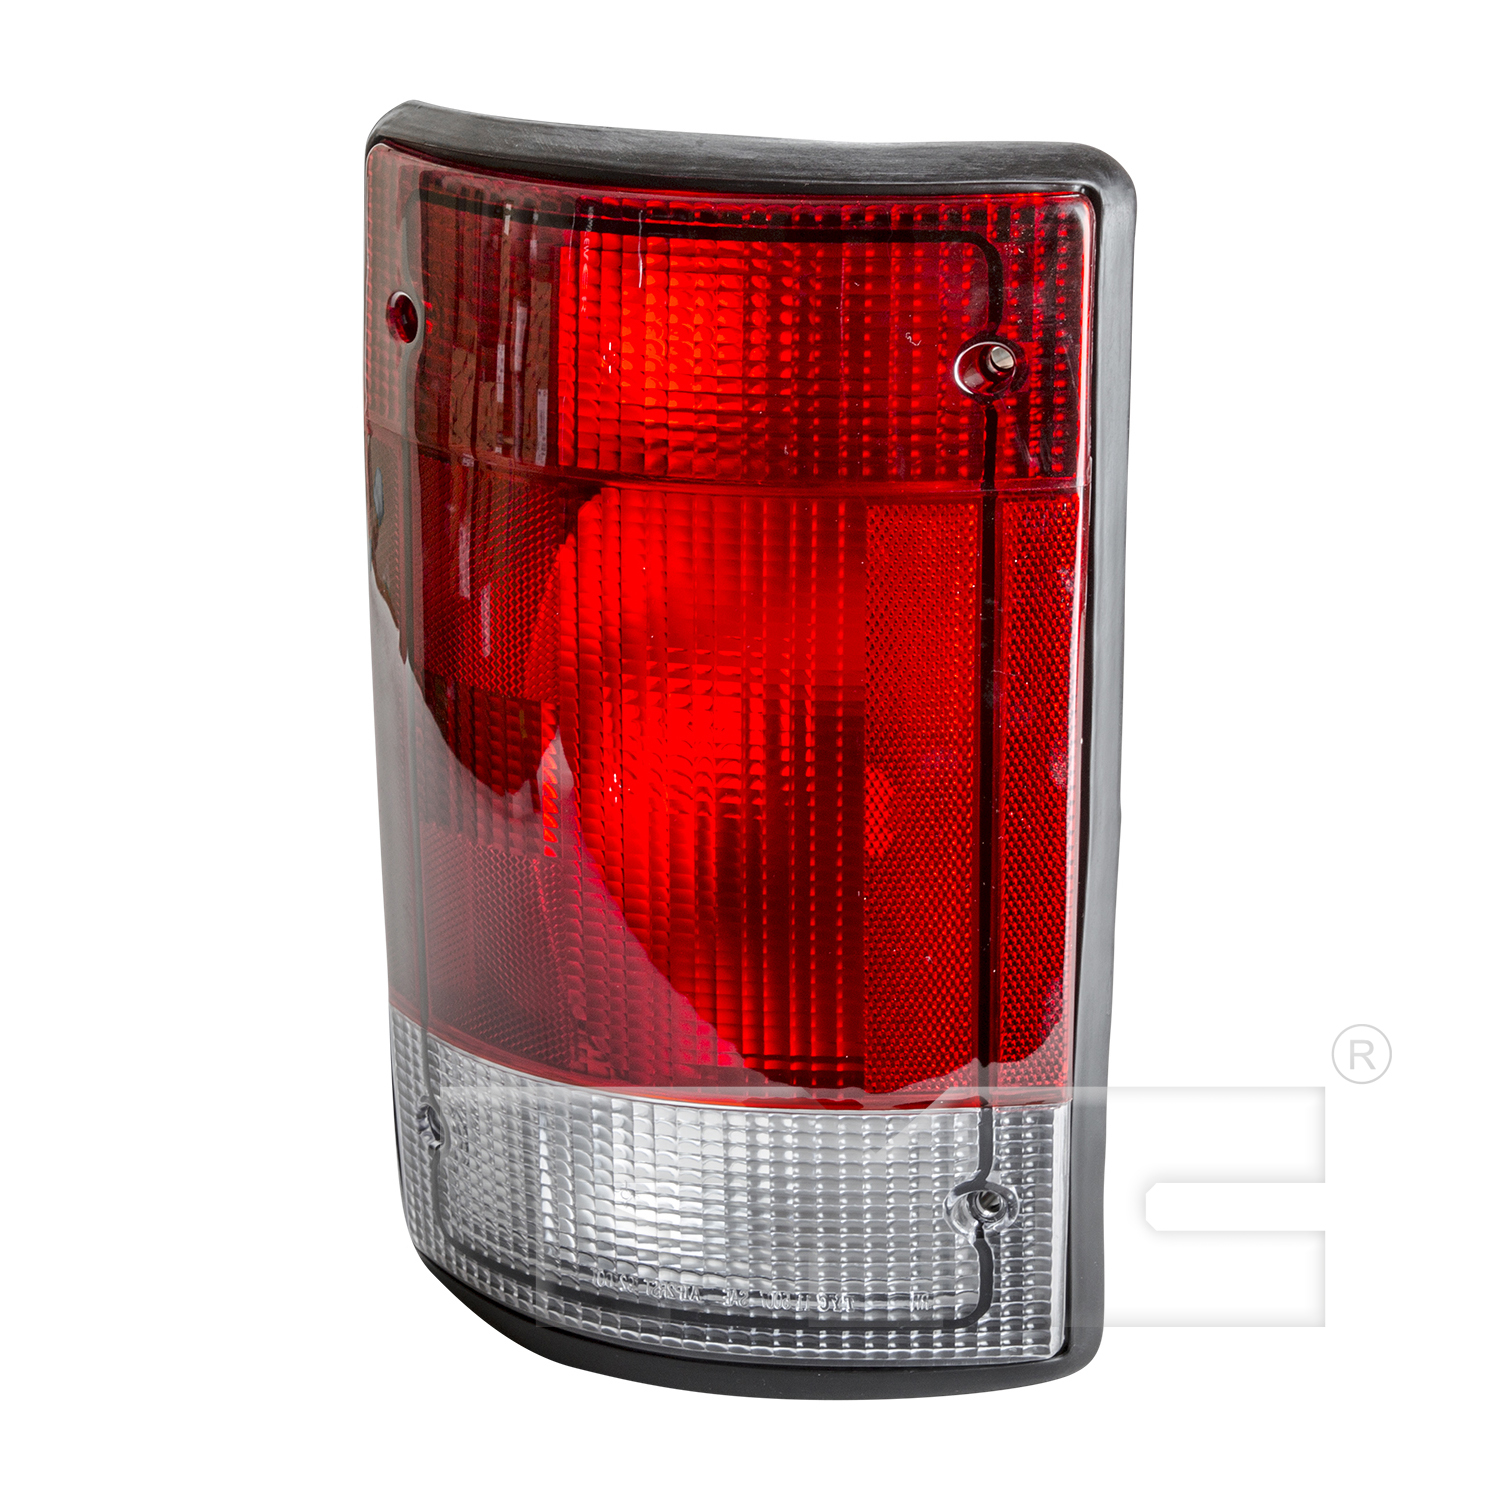 Aftermarket TAILLIGHTS for FORD - E-550 SUPER DUTY, E-550 SUPER DUTY,03-03,LT Taillamp assy